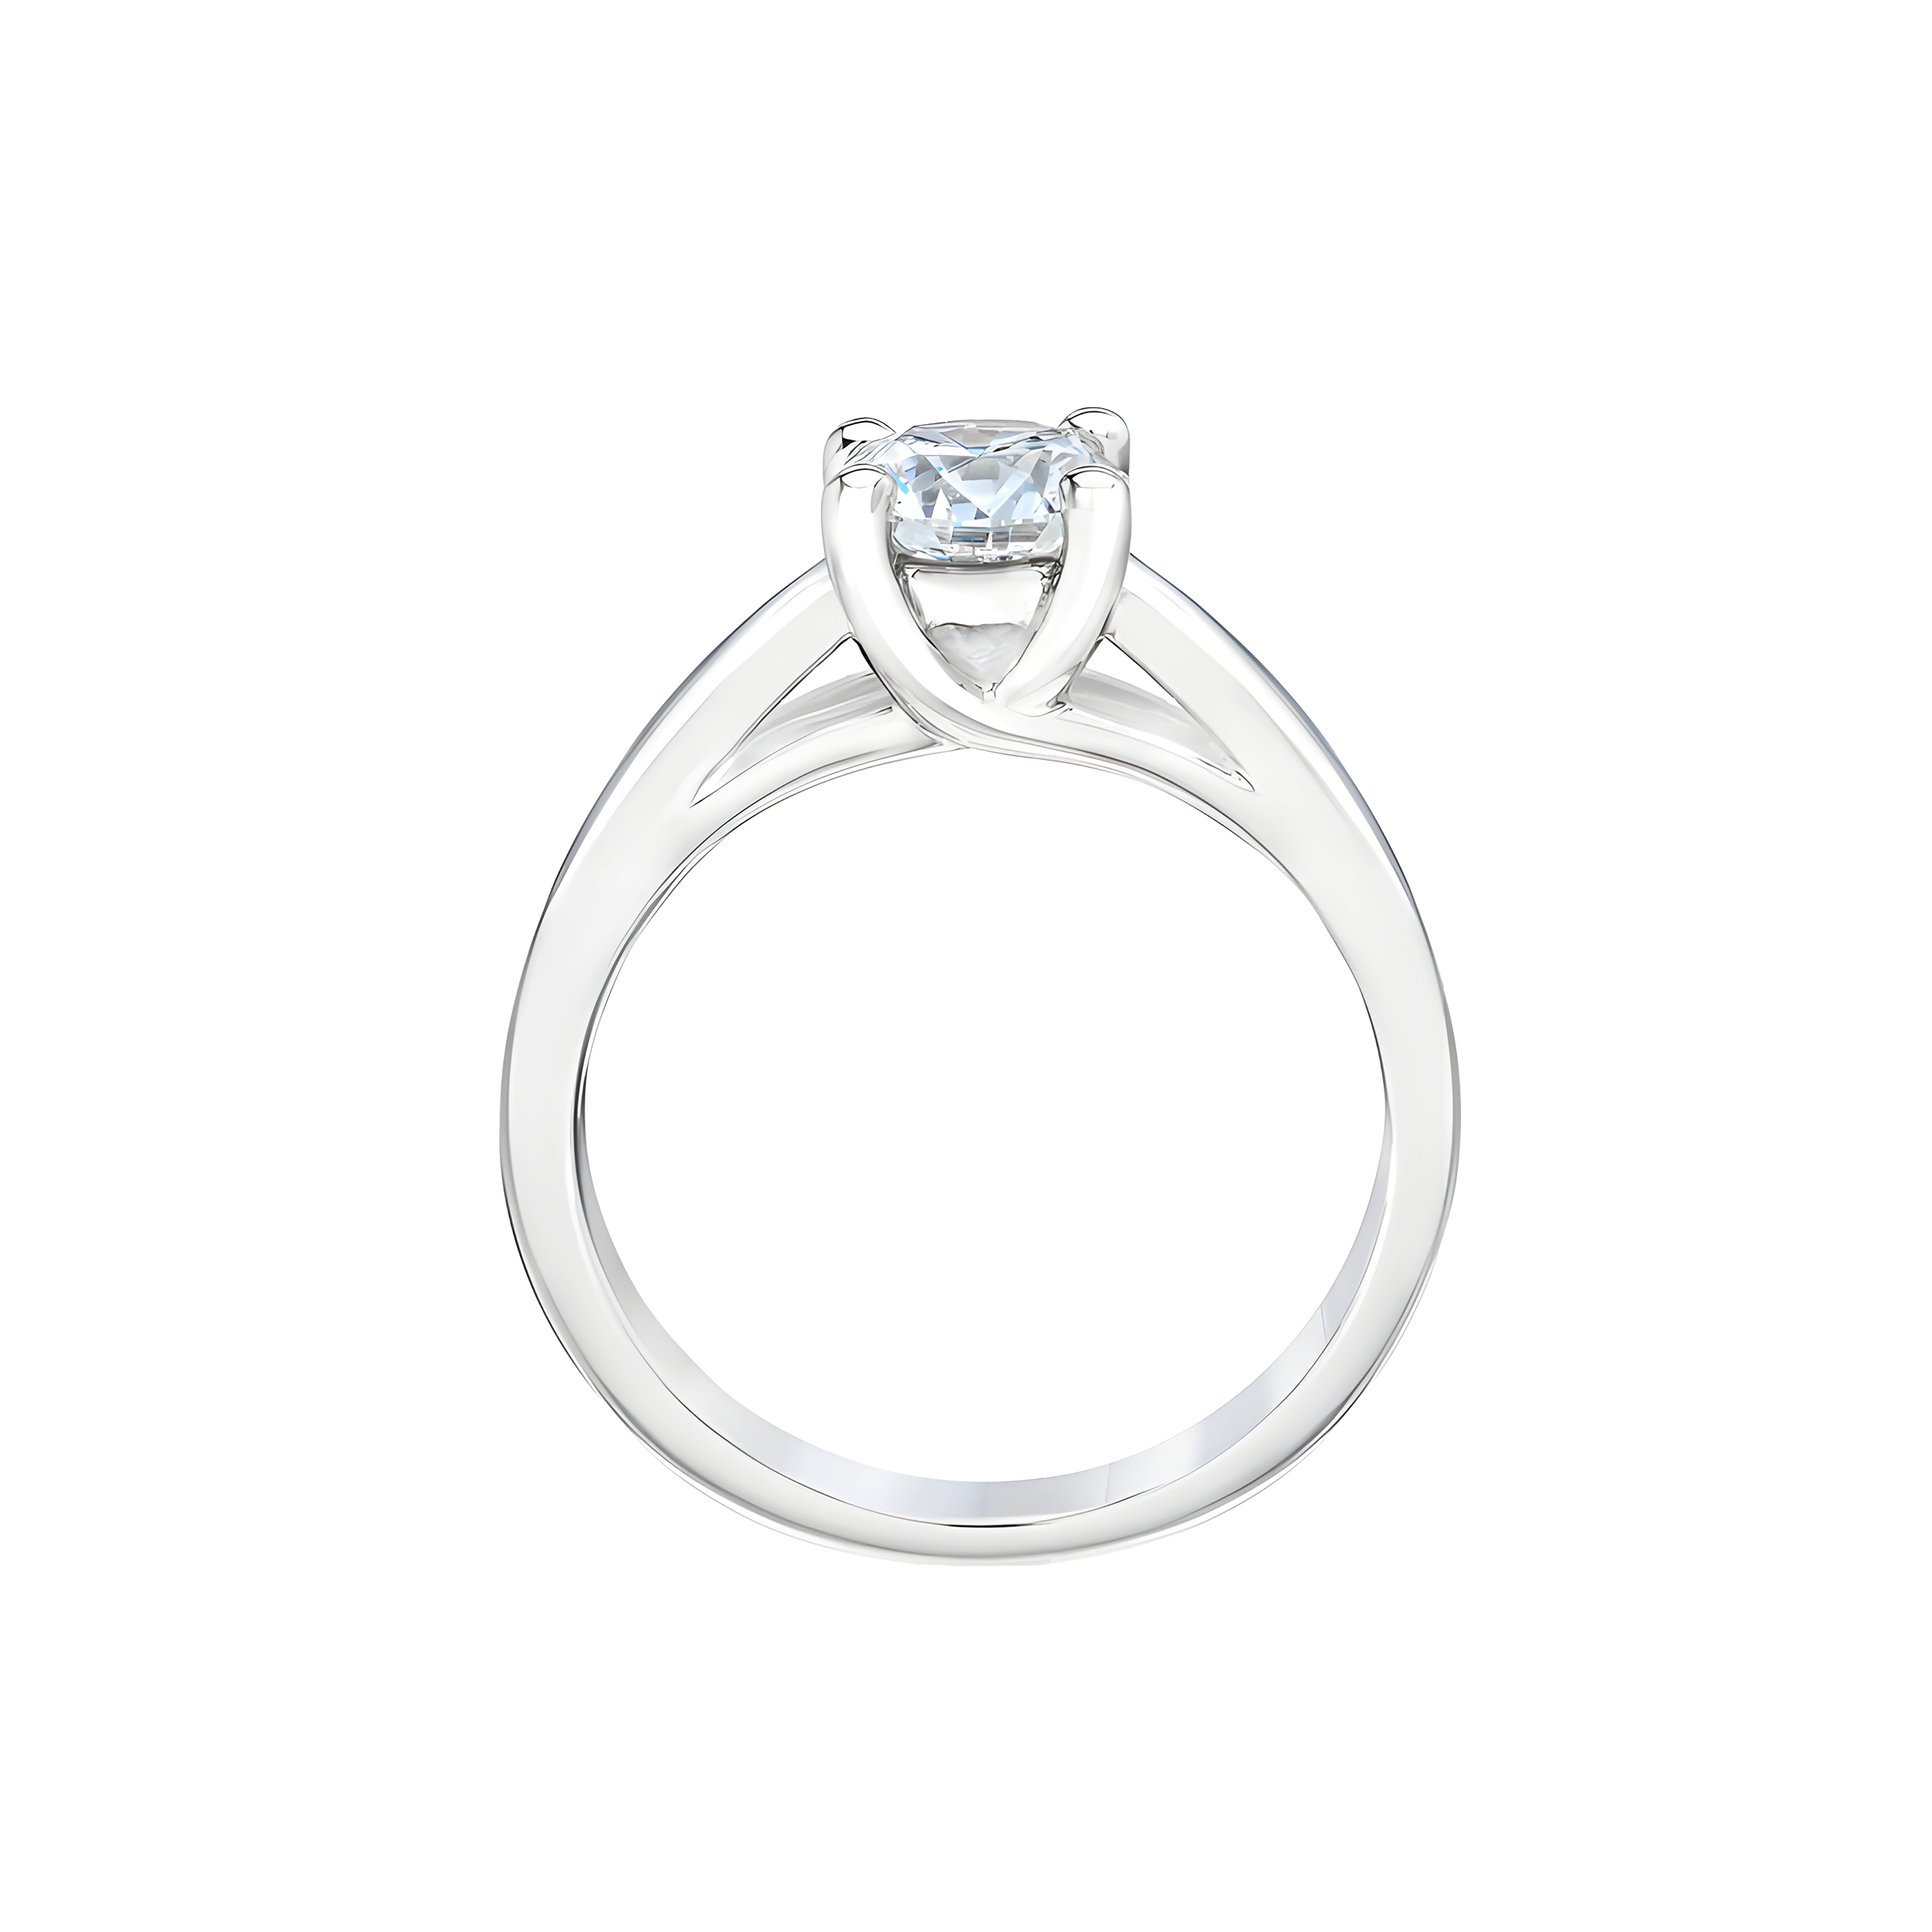 Round Brilliant Solitaire Diamond Engagement Ring in 18k White Gold